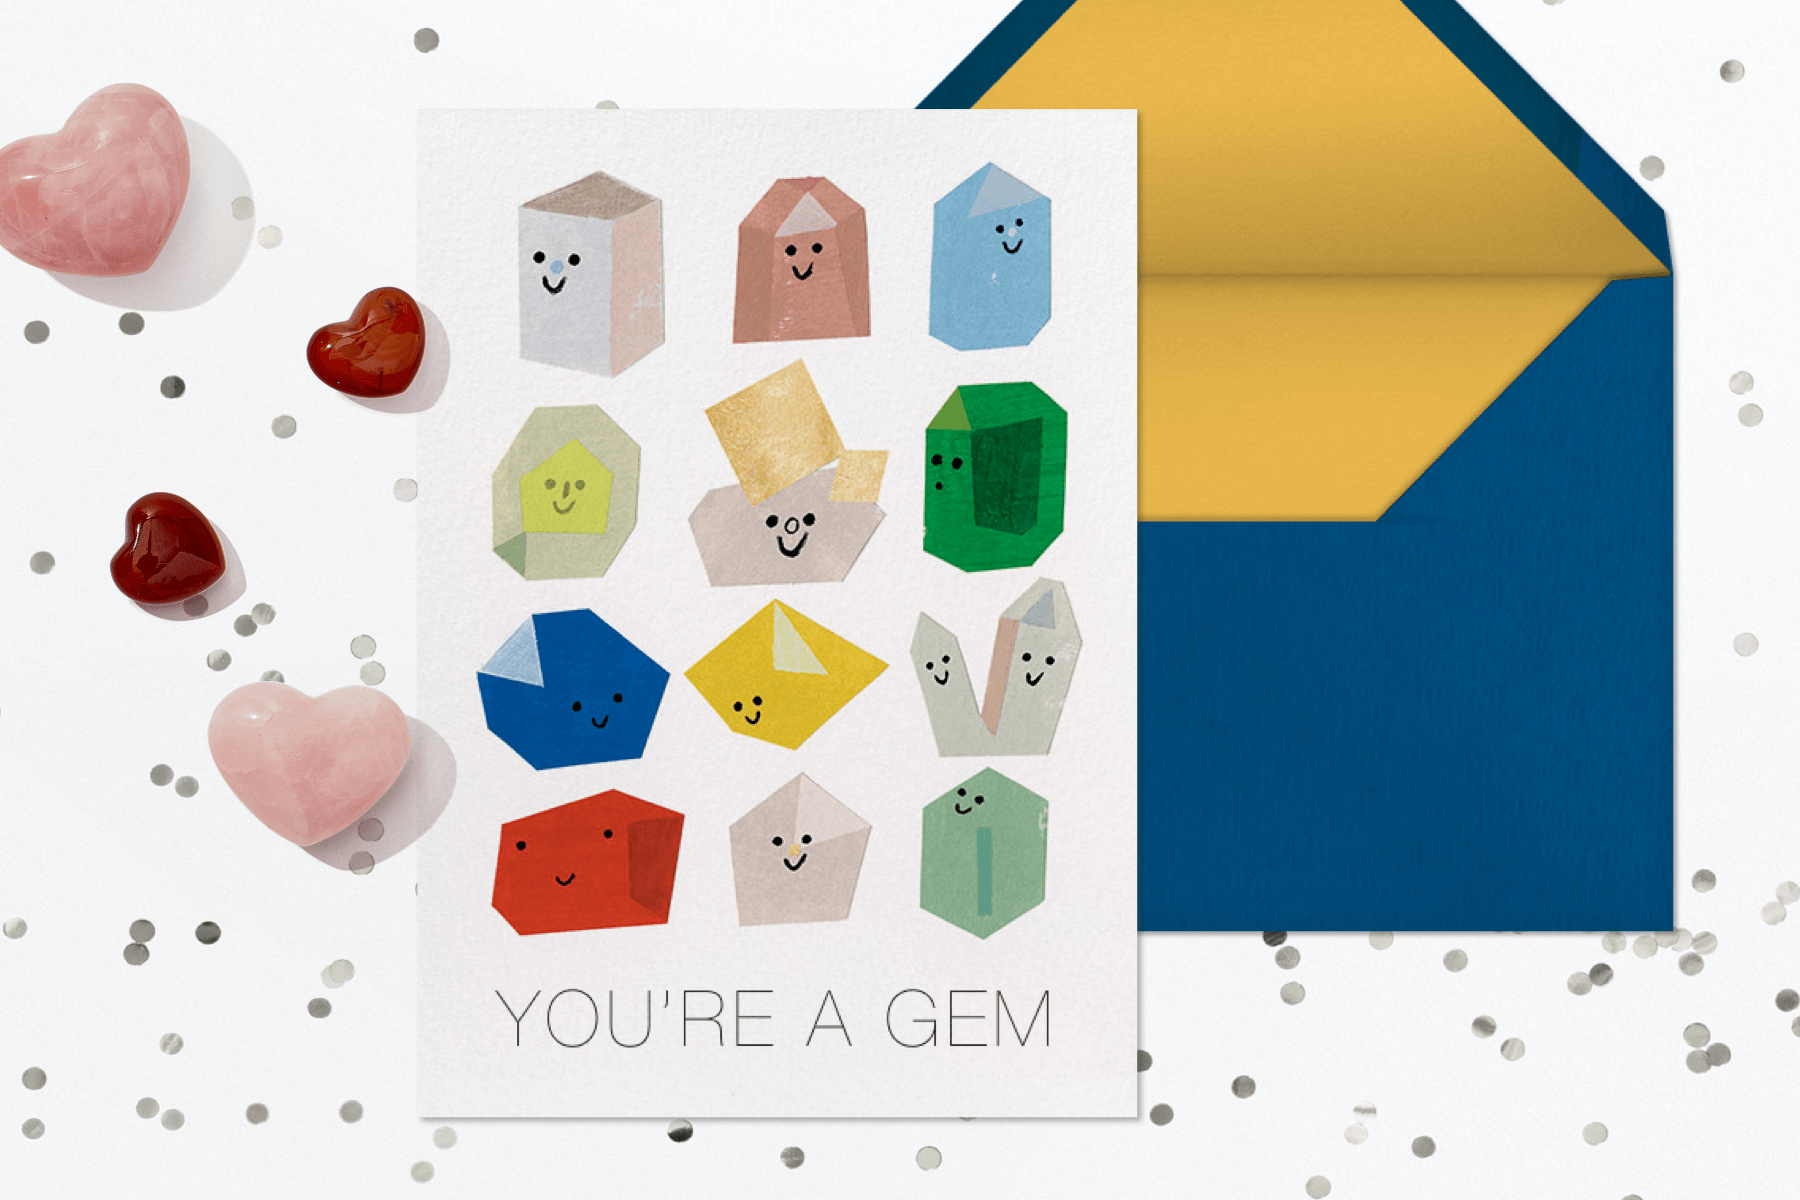 A Valentine’s Day card with smiling gemstones.